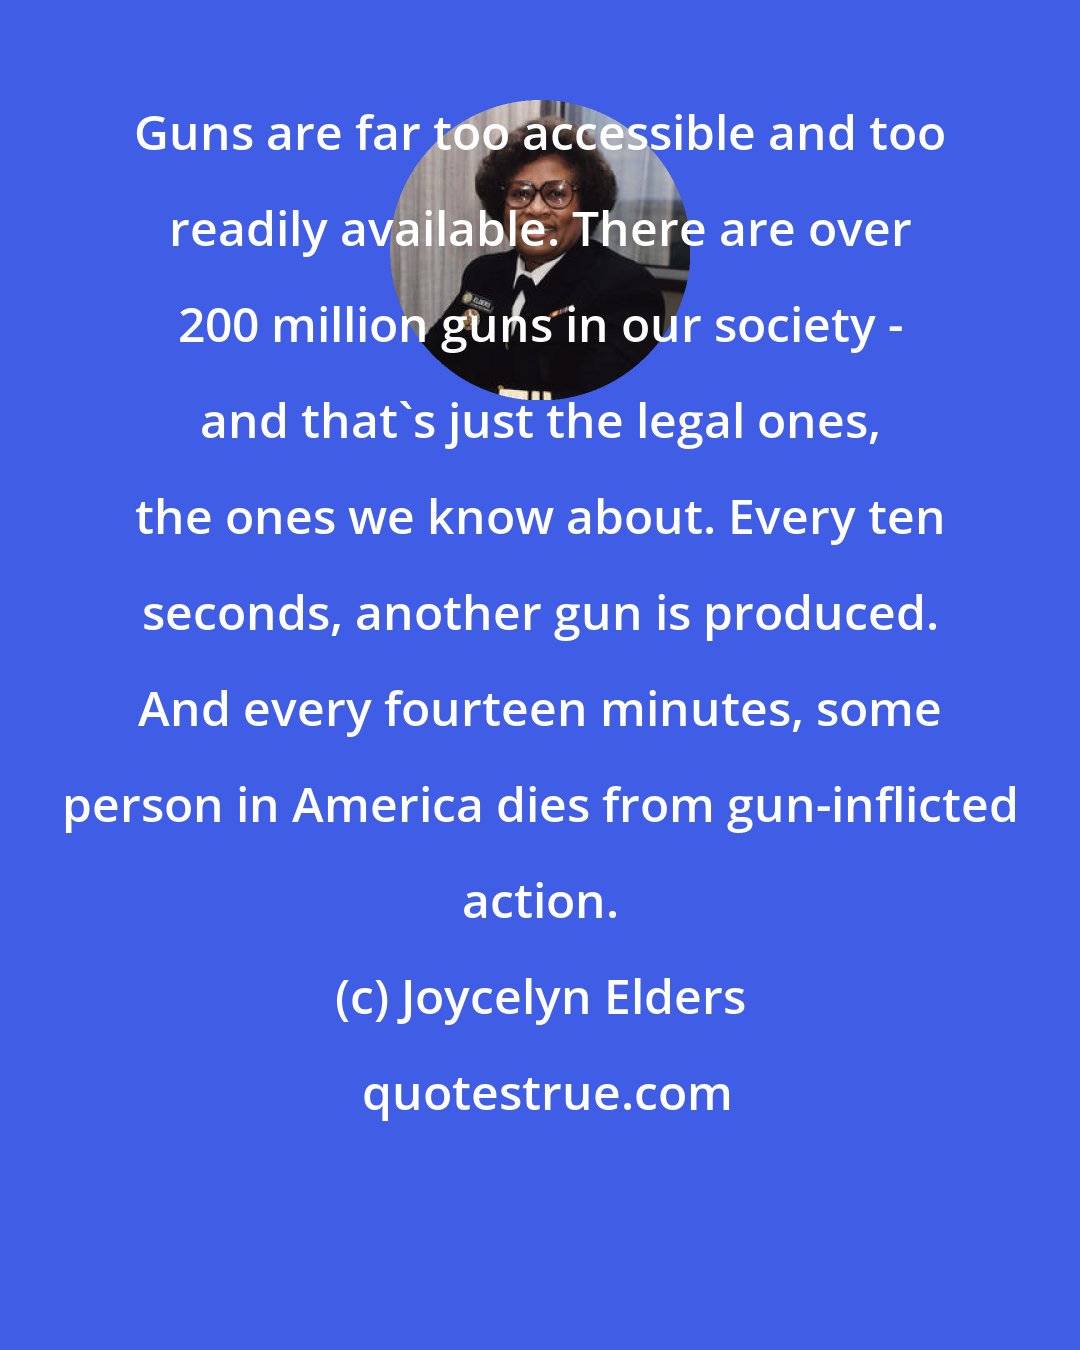 Joycelyn Elders: Guns are far too accessible and too readily available. There are over 200 million guns in our society - and that's just the legal ones, the ones we know about. Every ten seconds, another gun is produced. And every fourteen minutes, some person in America dies from gun-inflicted action.